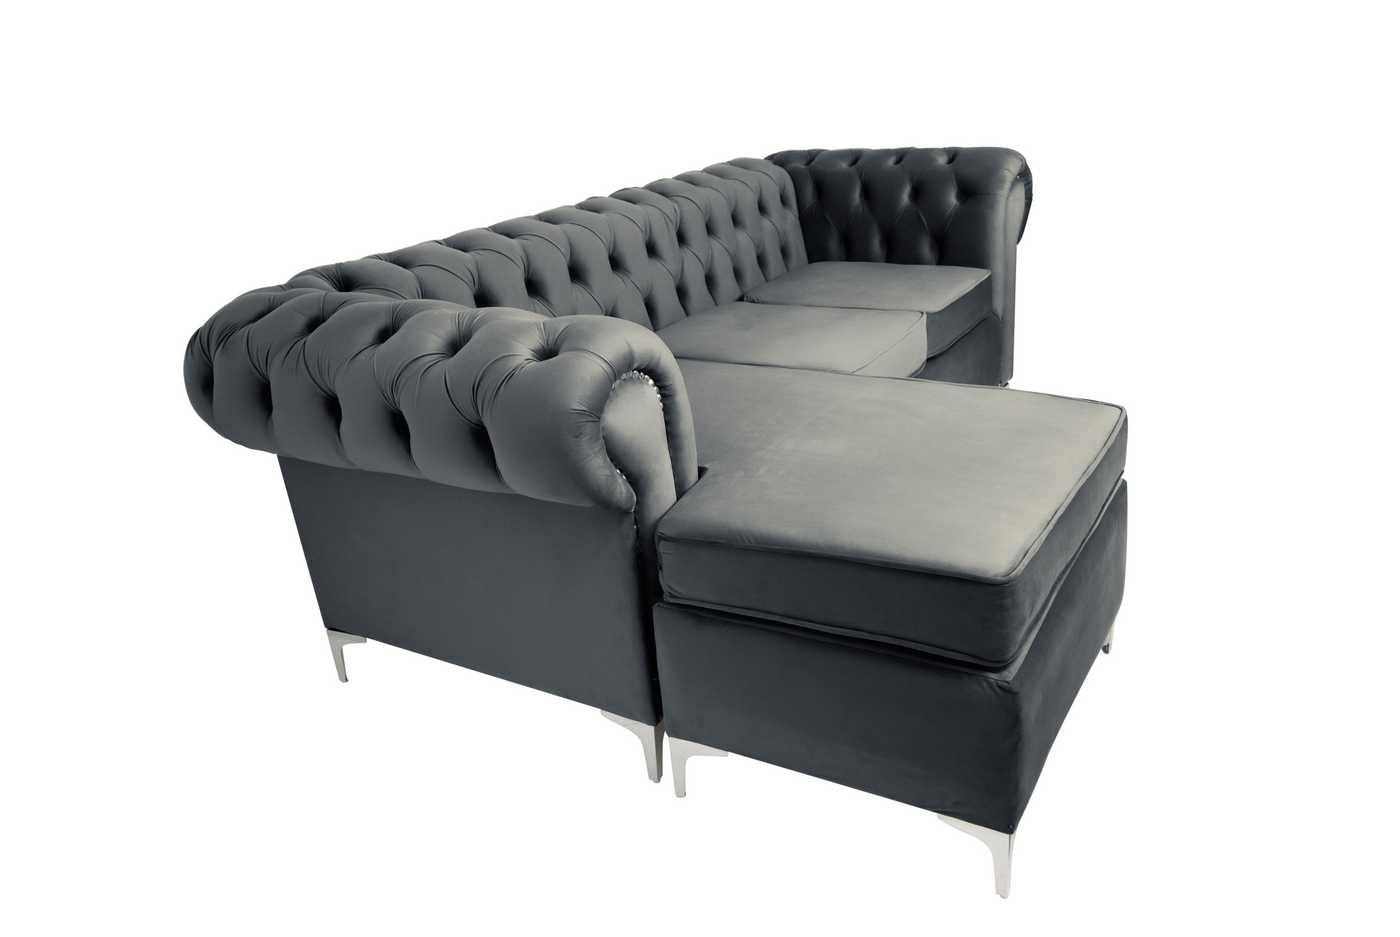 Odel Chesterfield 3 Seater Universal Couch